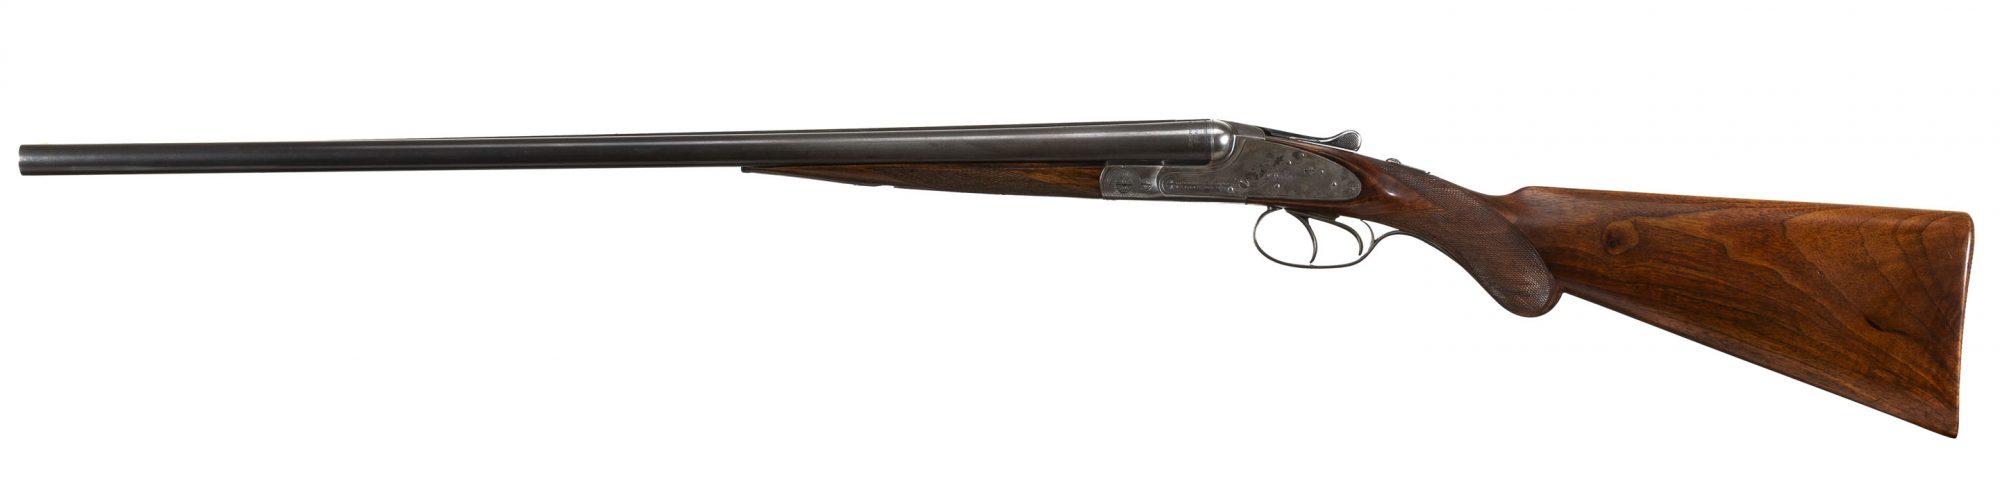 Photo of a J.P. Sauer 20 gauge side-by-side shotgun from 1903, for sale by Turnbull Restoration of Bloomfield, NY